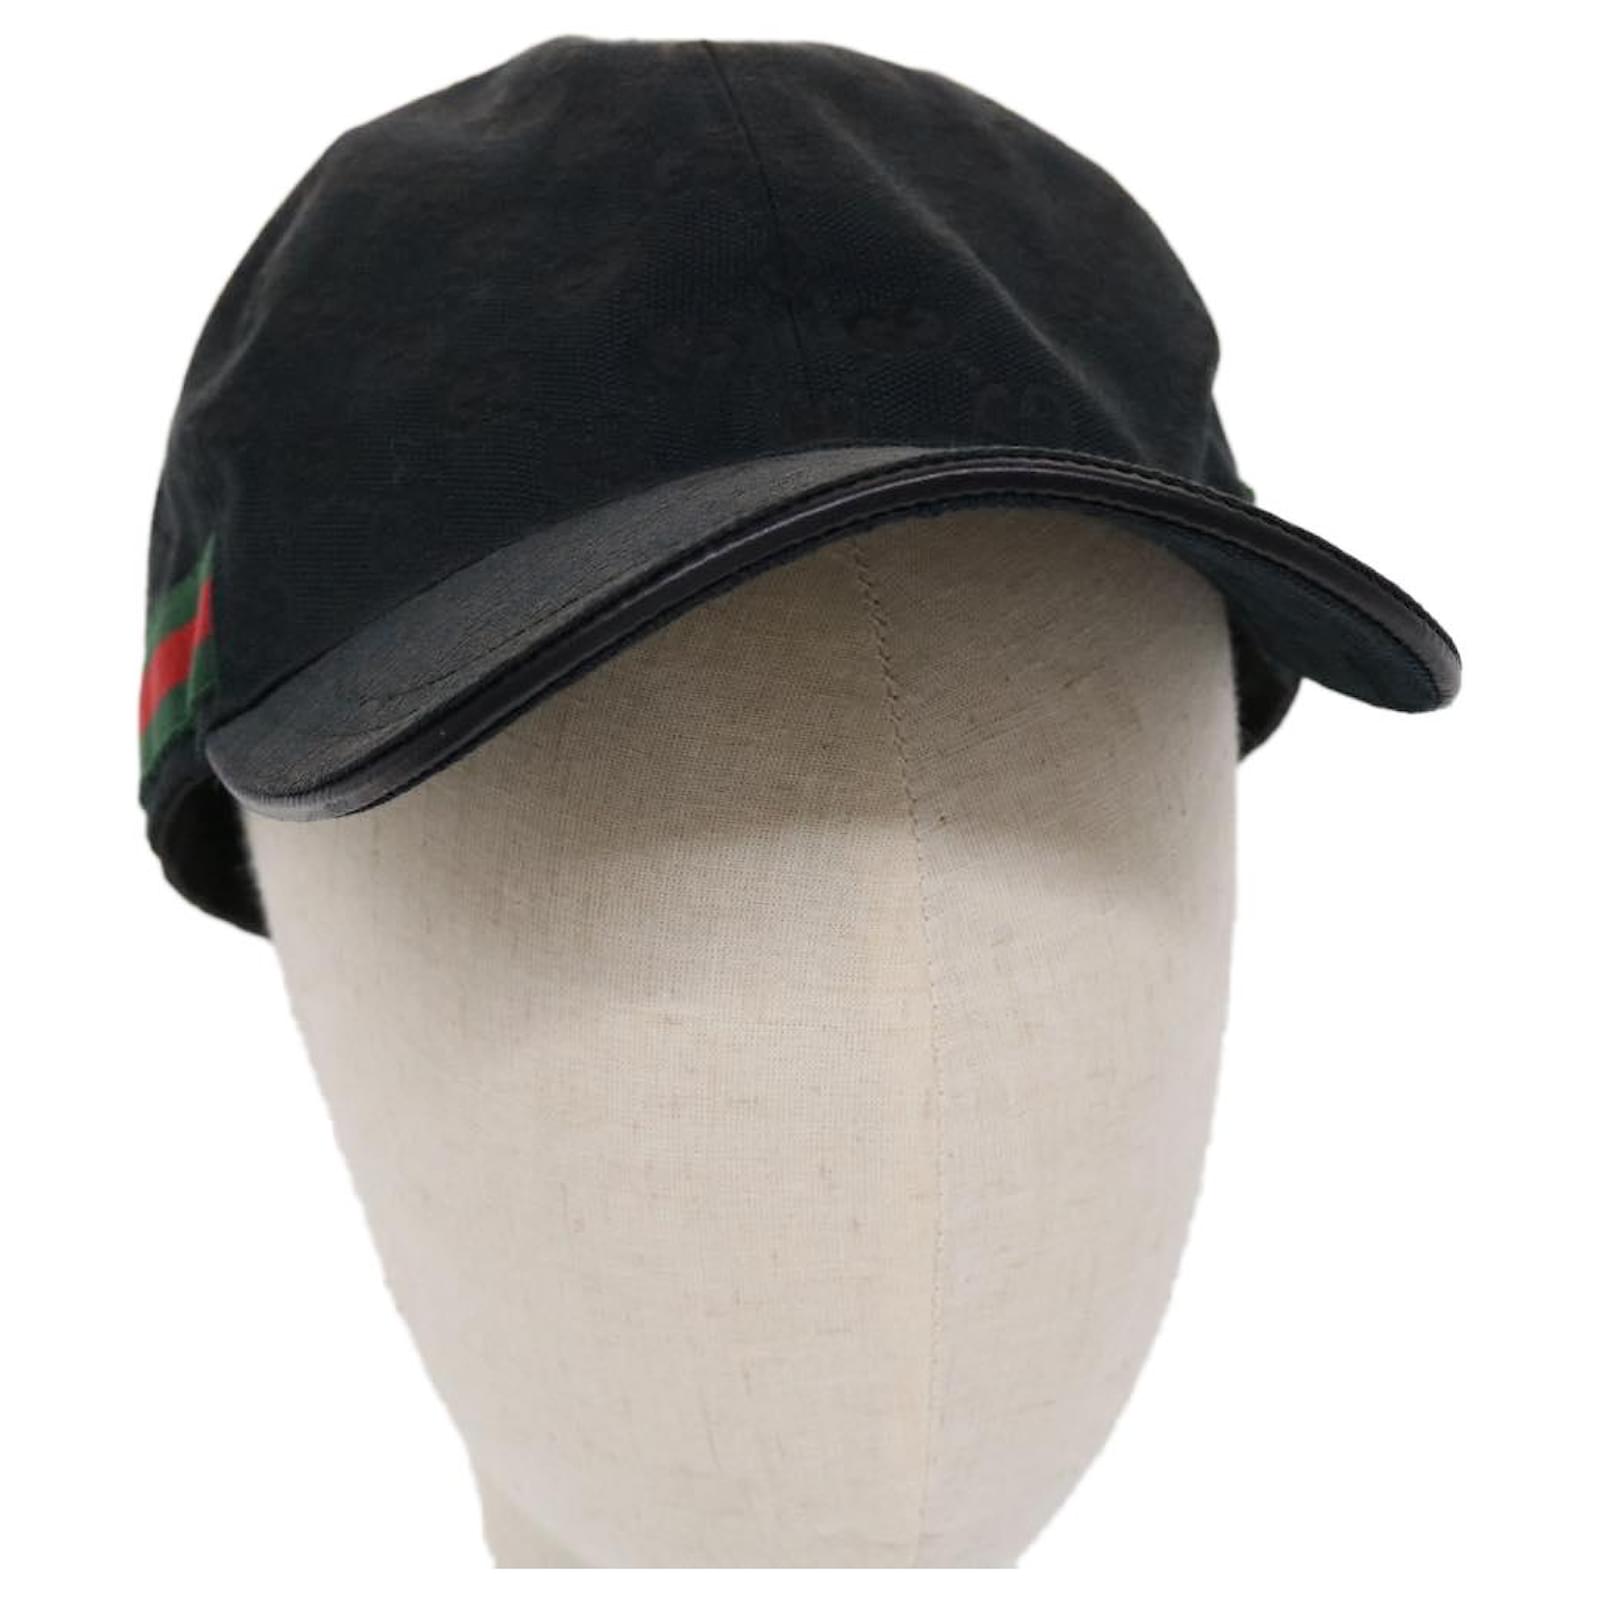 GUCCI GG Canvas Web Sherry Line Cap XL Black Red Green 200035 Auth